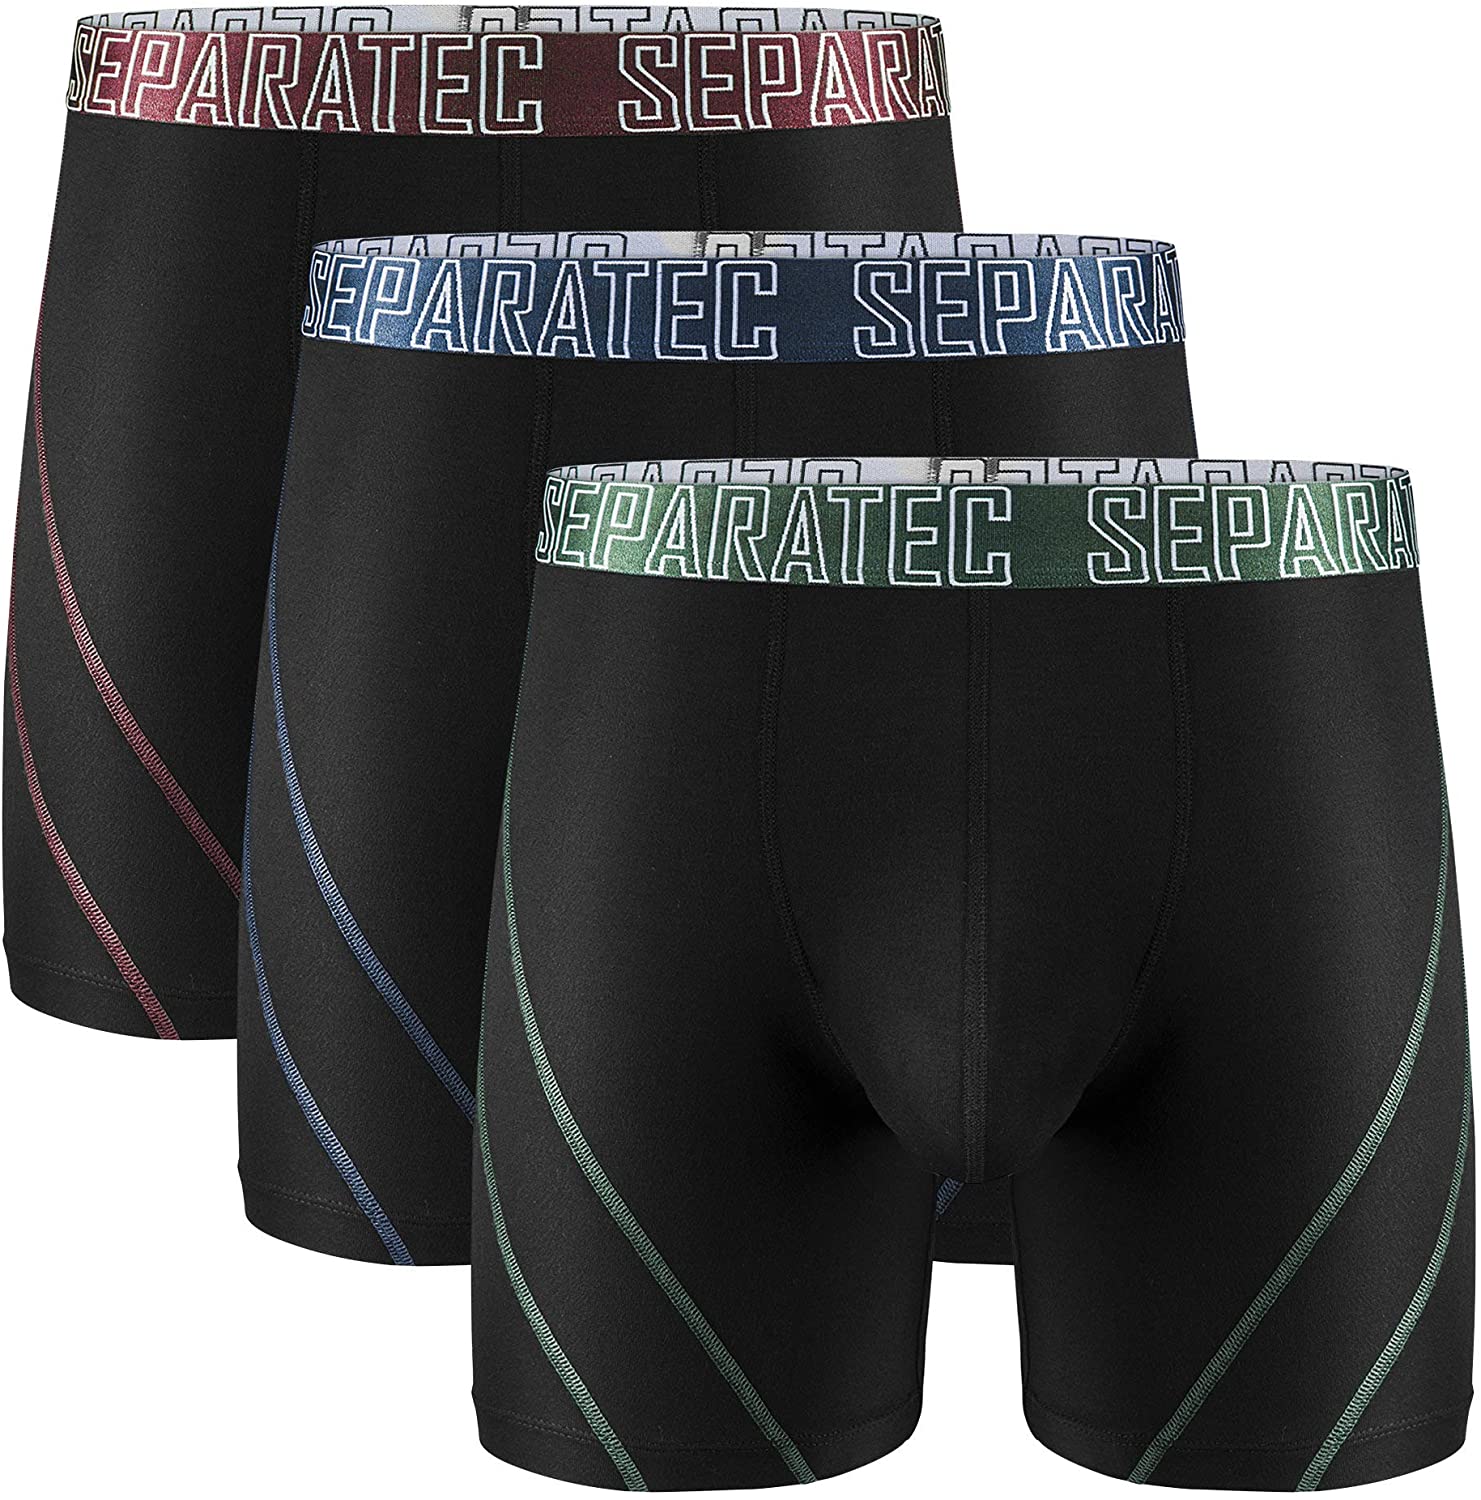 Separate & Lift, Separatec Stylish Briefs Starlight Bamboo Rayon 3 Pack